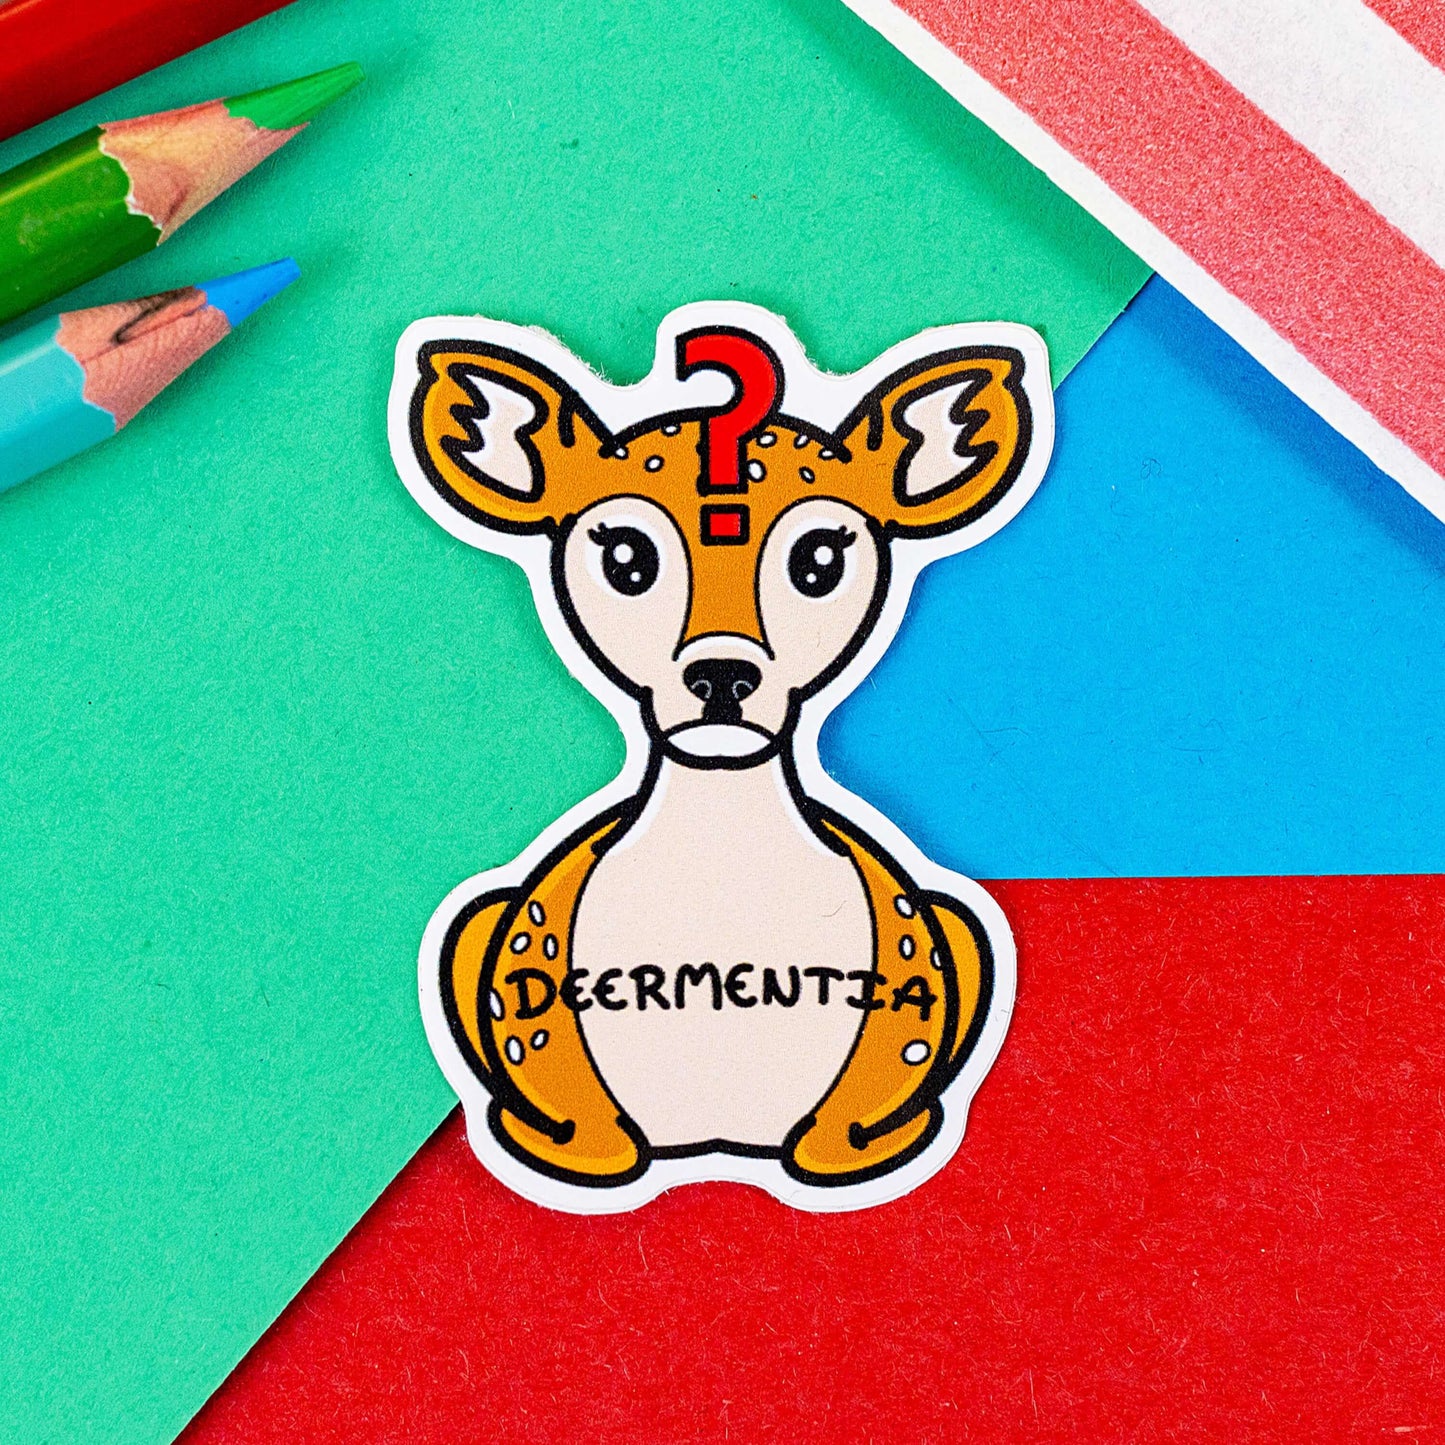 Deermentia Sticker - Dementia sticker shown on a red, blue and green background with colouring pencils and a red stripe candy bag. A brown deer shaped sticker with long eyelashes, blank expression on it's face and red question mark in the middle of it's forehead. The deer has fluffy ears and white spots and is in a lying down straight on position. 'Deermentia' is written across the light brown tummy in black writing. The design is to raise awareness for dementia.